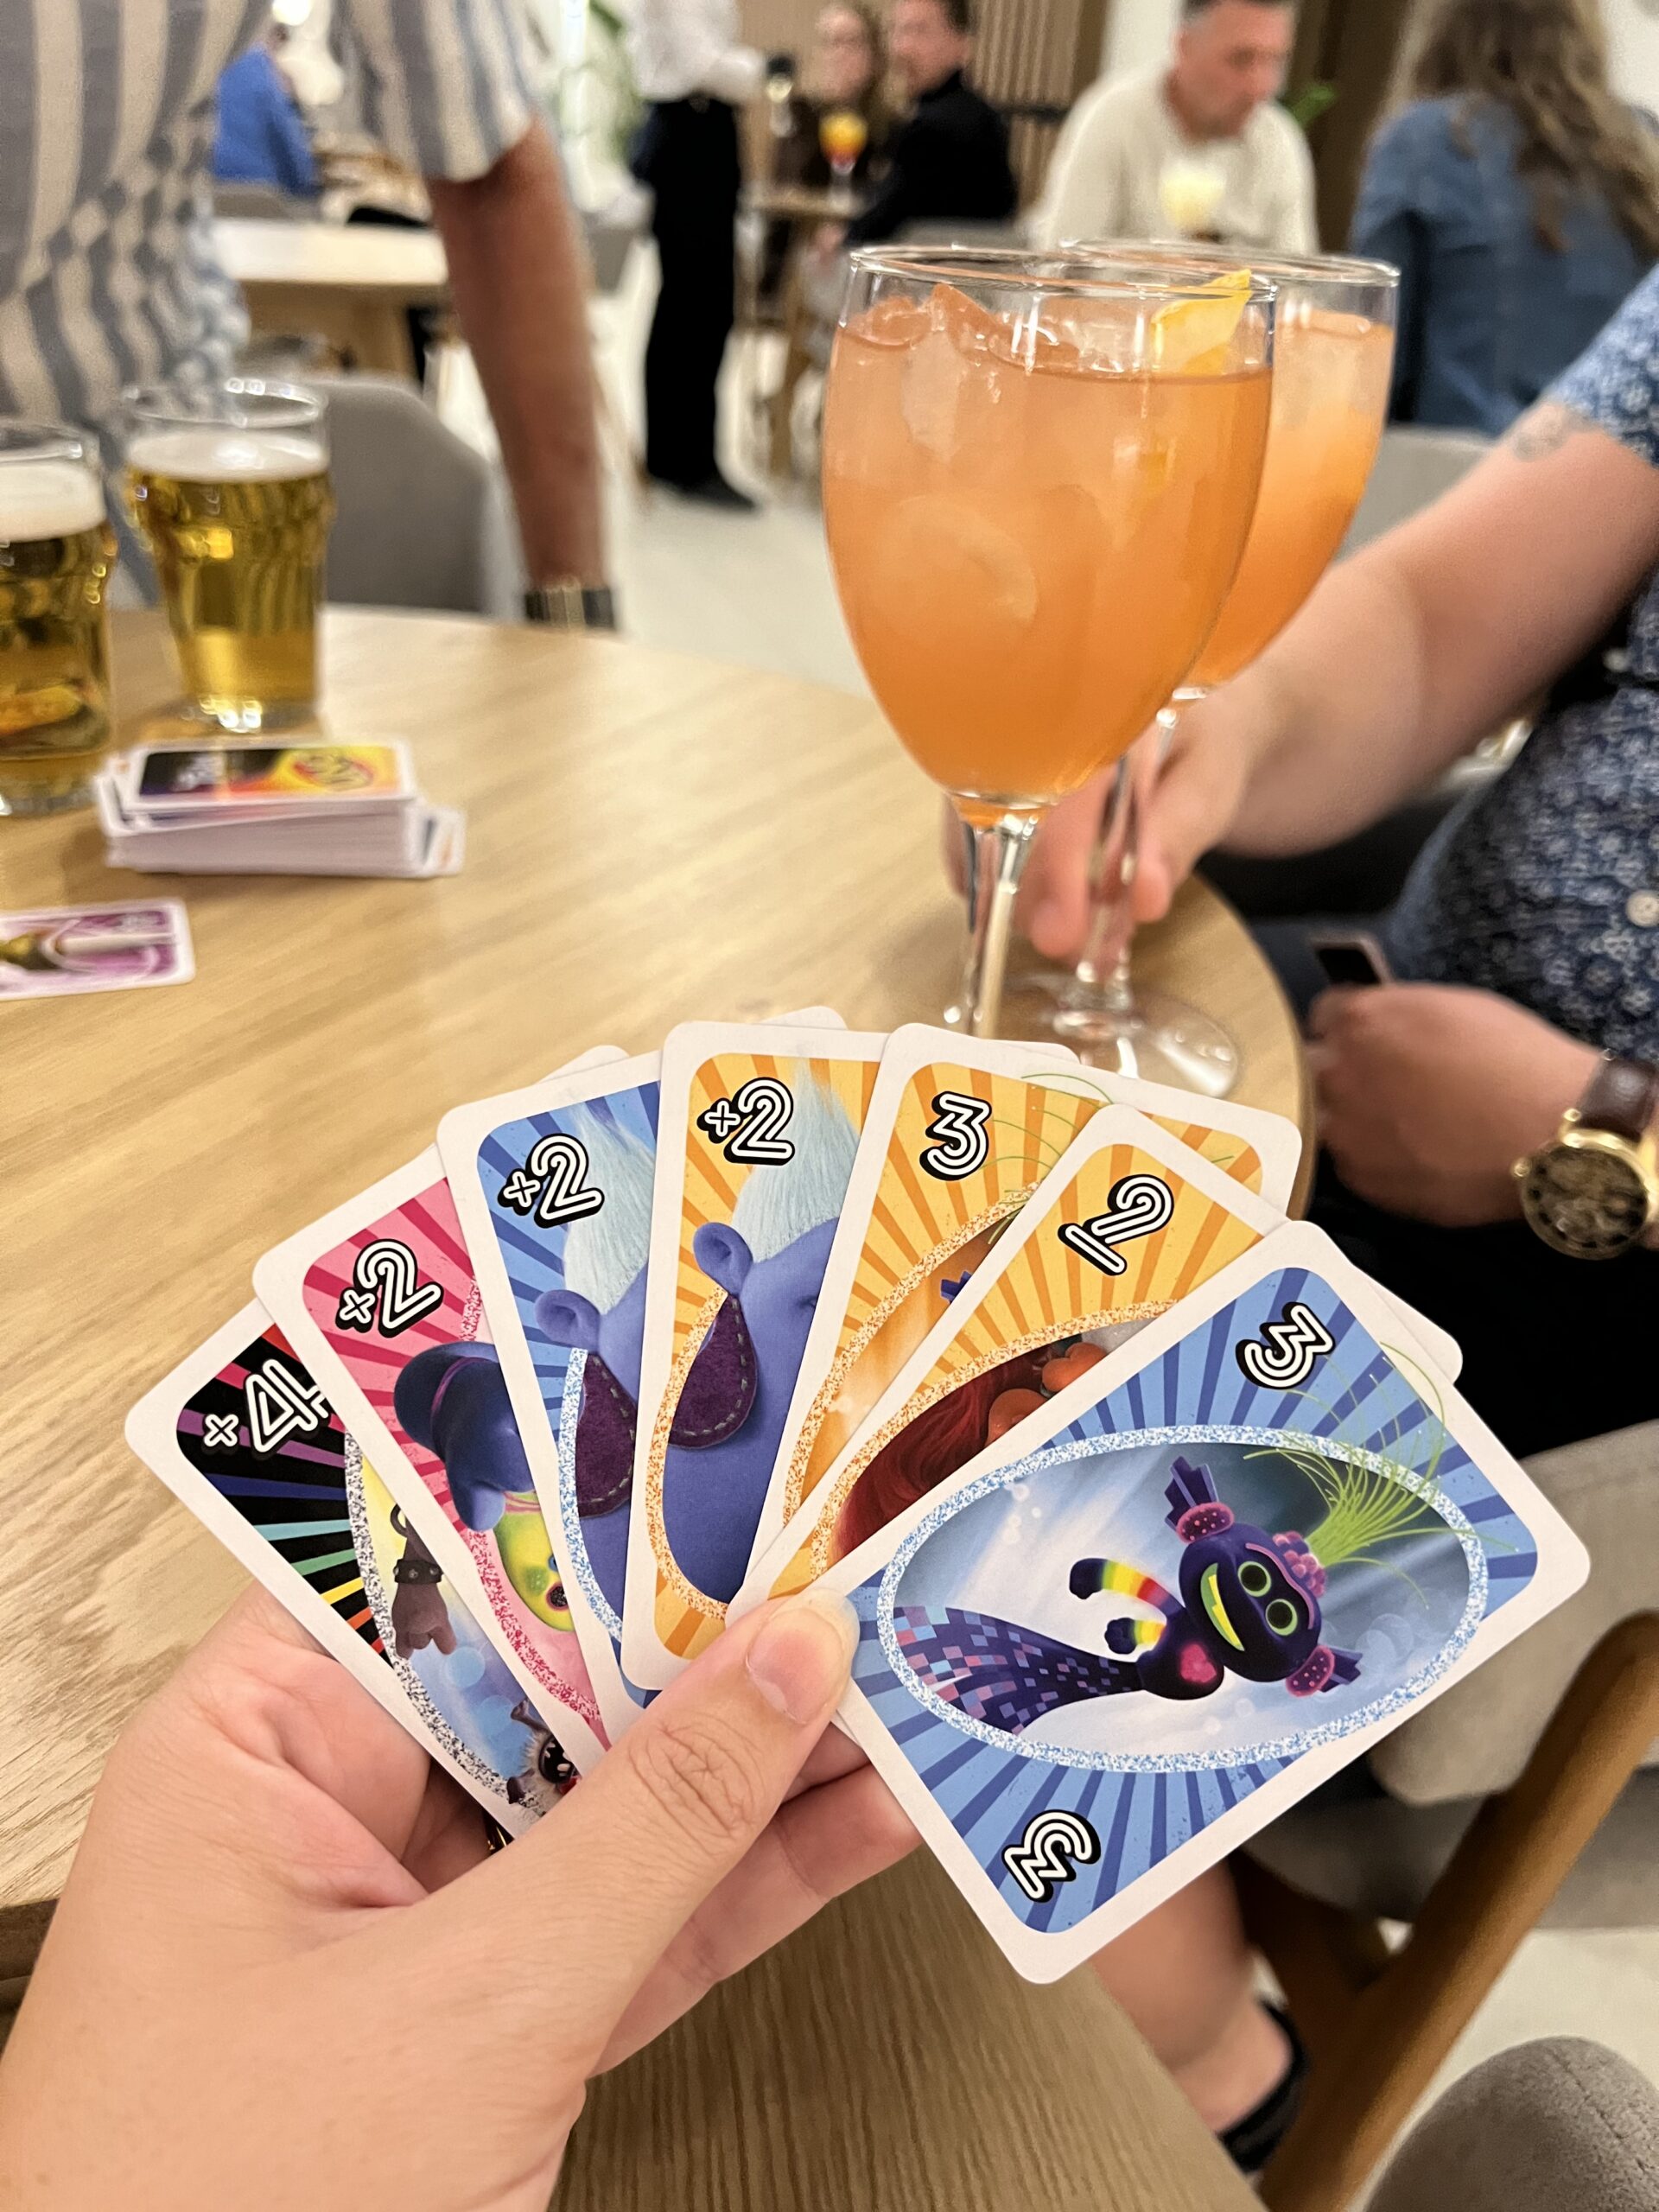 My uno hand (trolls uno!) with cocktails and beer from the bar